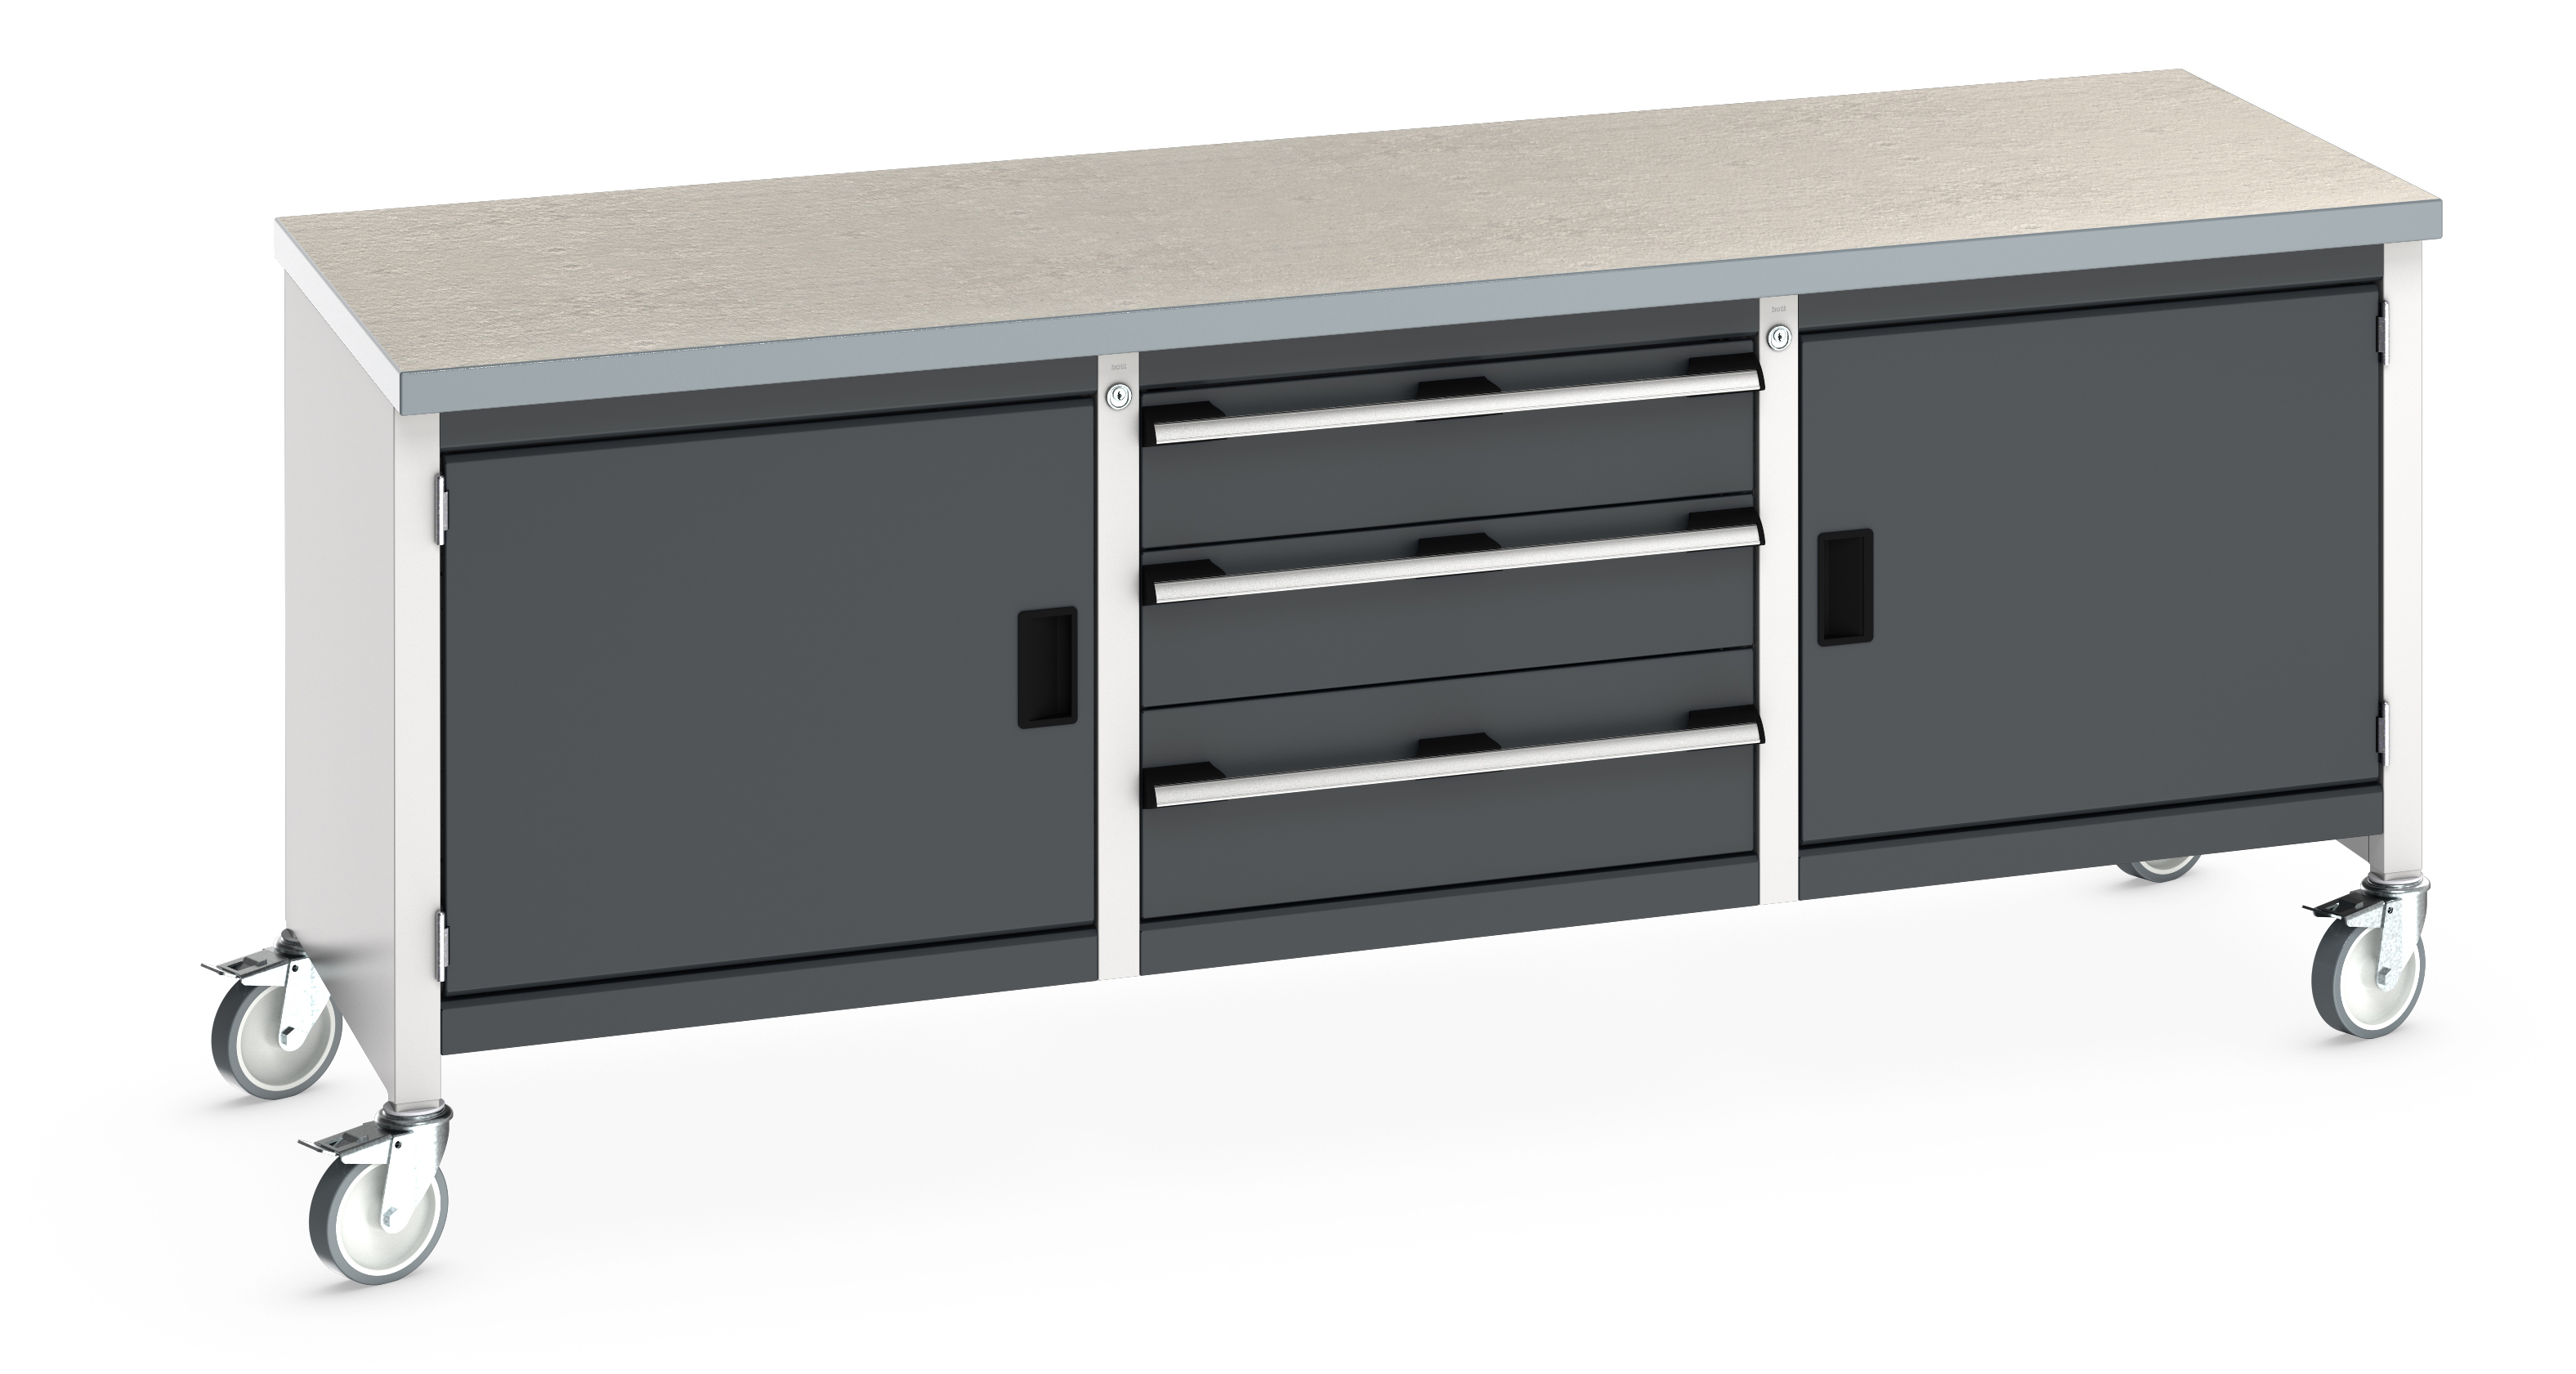 Bott Cubio Mobile Storage Bench With Full Cupboard / 3 Drawer Cabinet / Full Cupboard - 41002126.19V